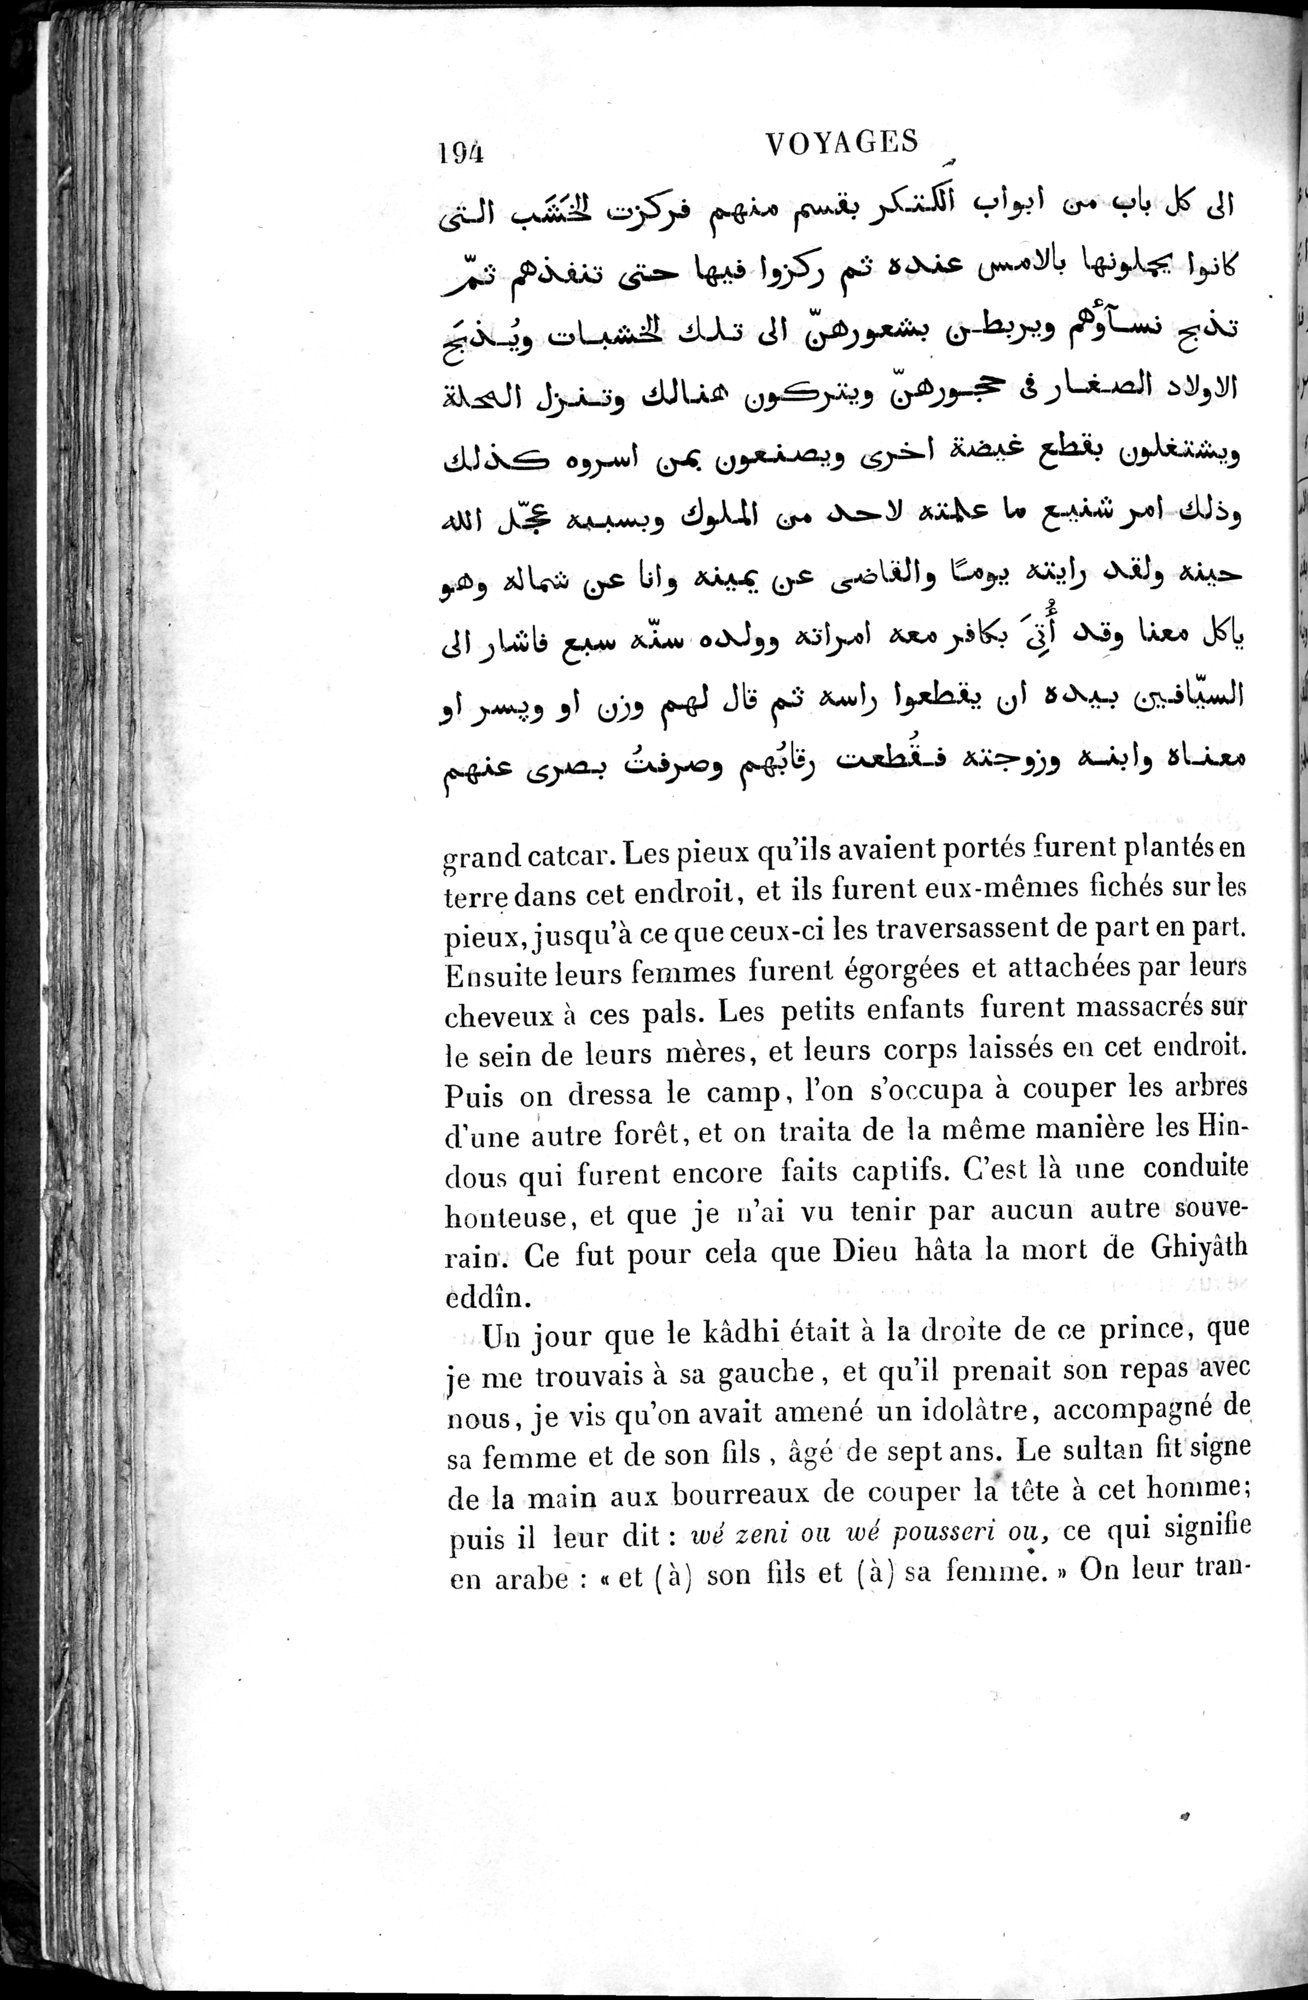 Voyages d'Ibn Batoutah : vol.4 / Page 206 (Grayscale High Resolution Image)